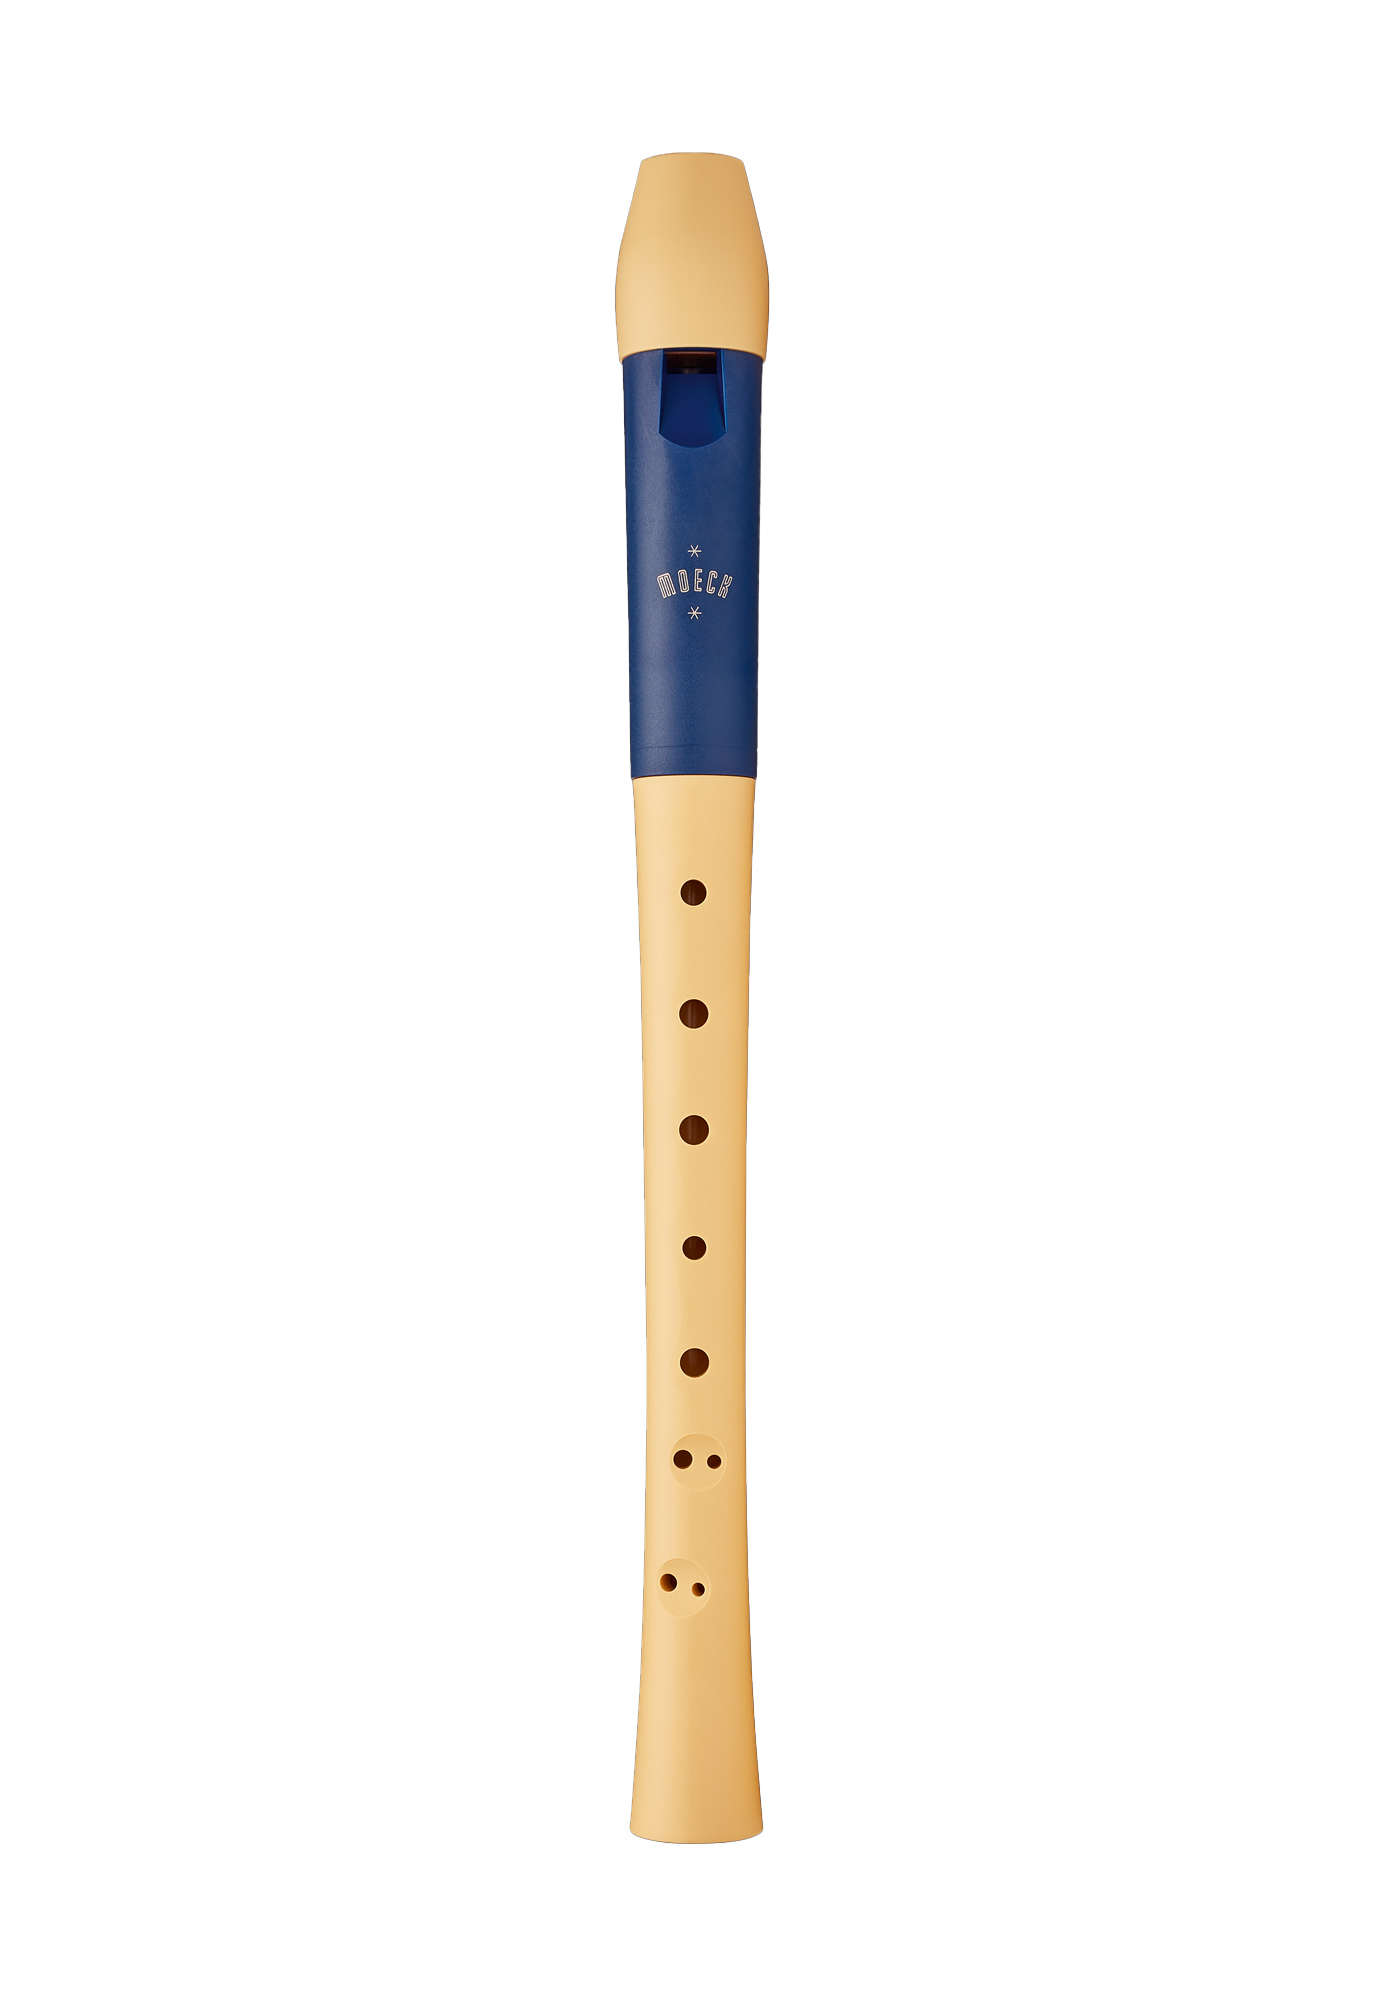 Moeck 1021 Soprano Recorder Flauto 1 with double hole